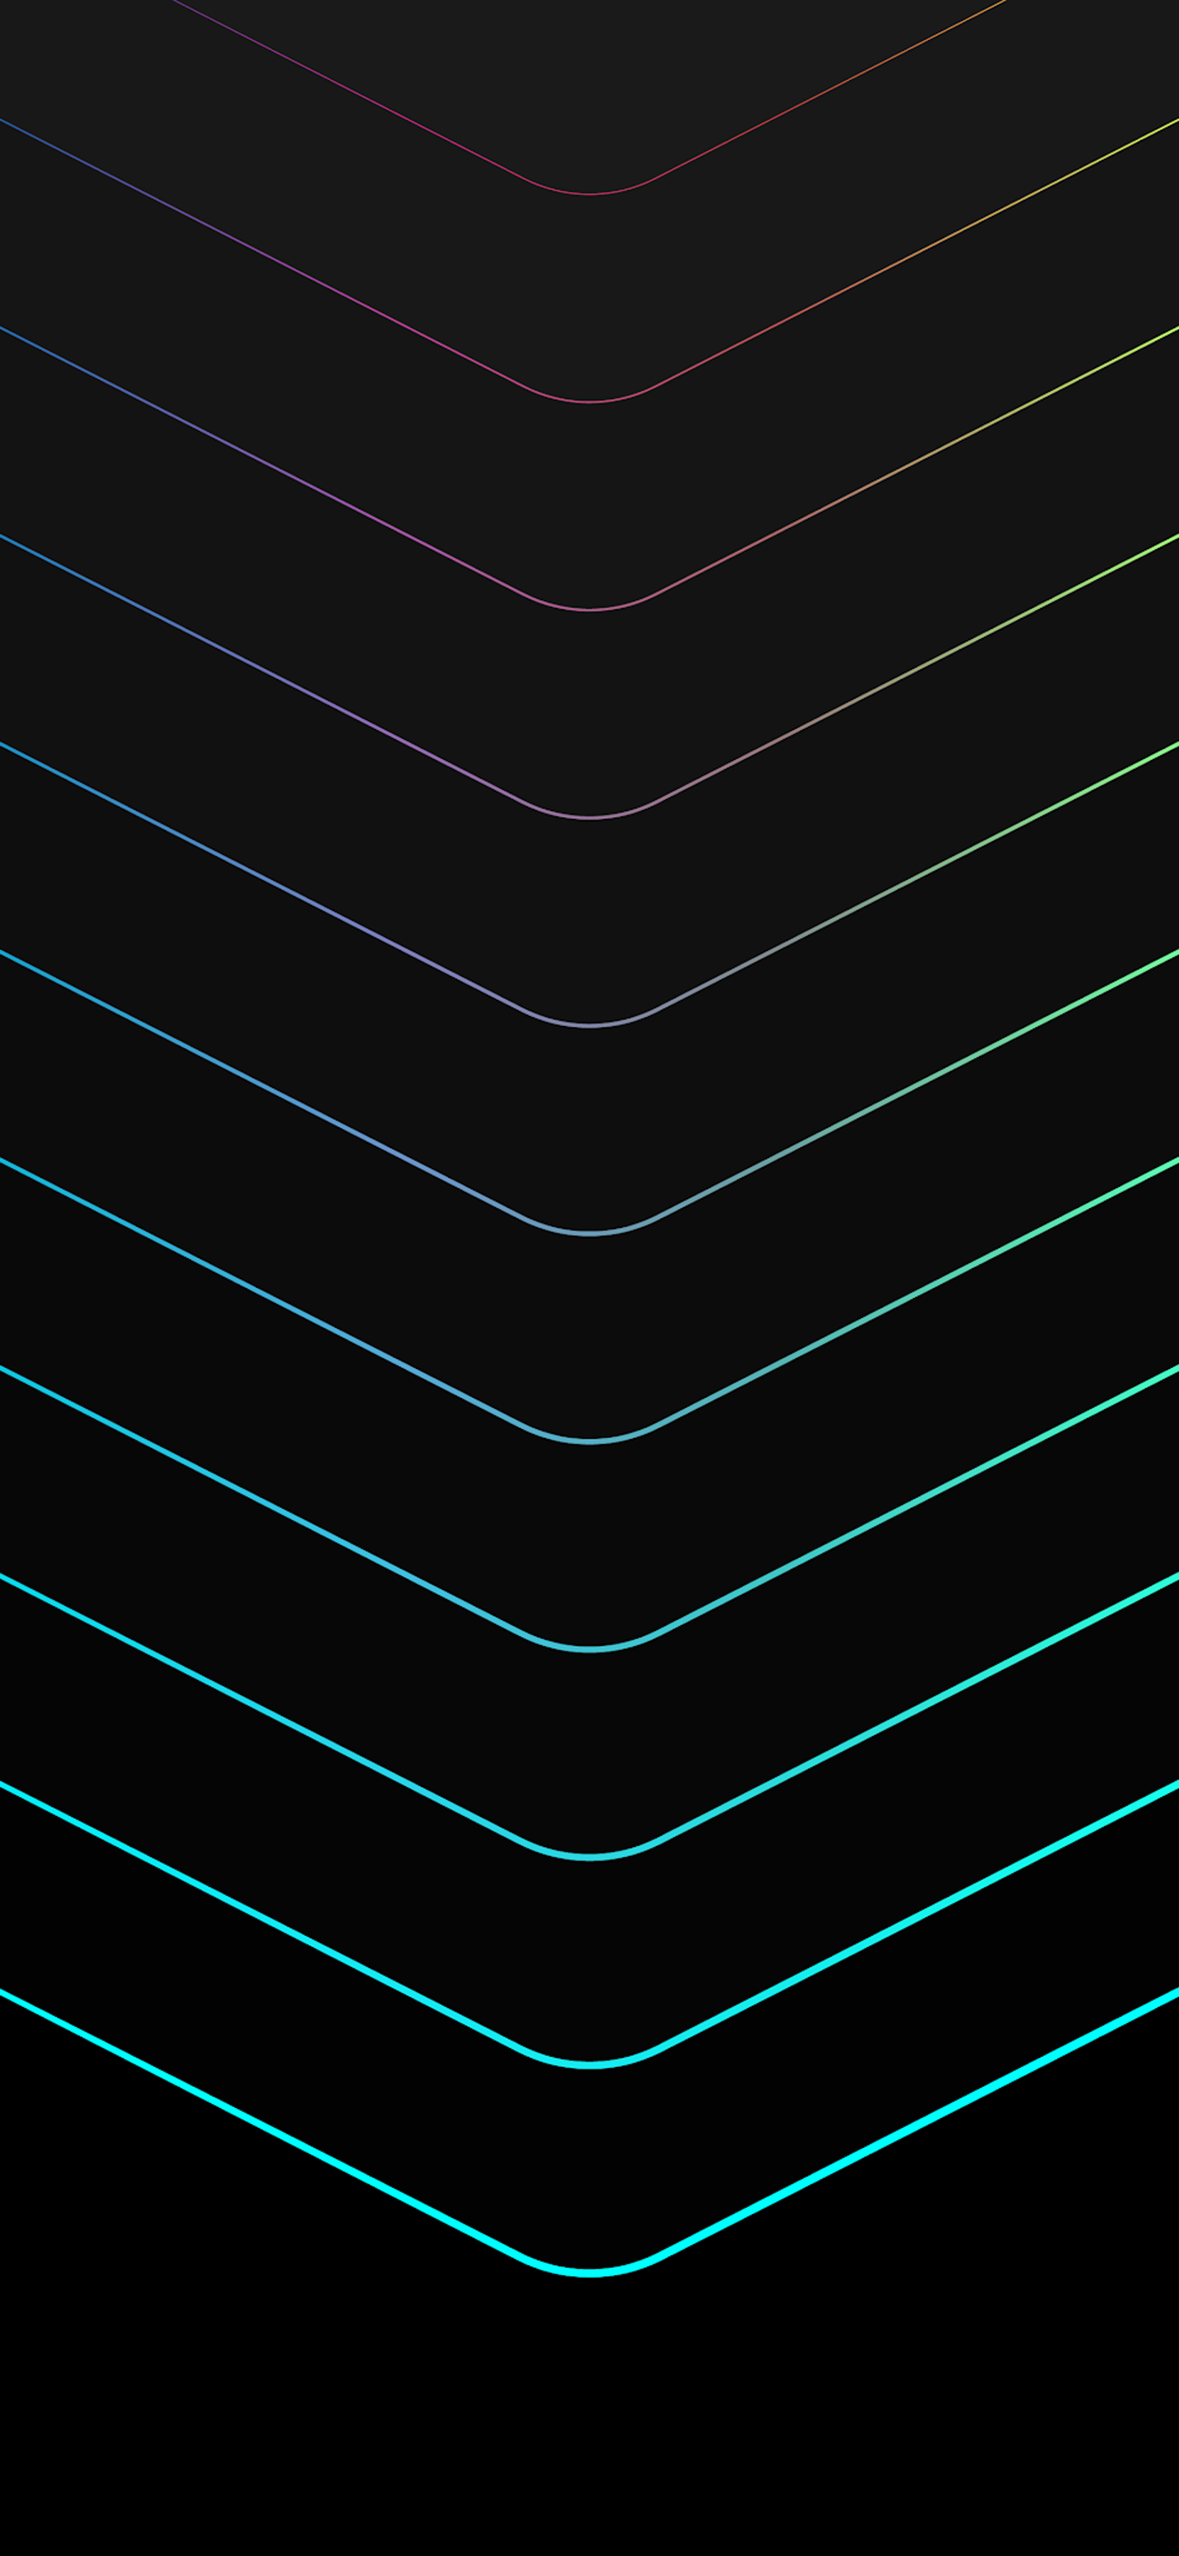 Abstract iPhone wallpaper featuring sleek colored lines with a neon glow on a 4k dark background, ideal for a minimalist aesthetic.